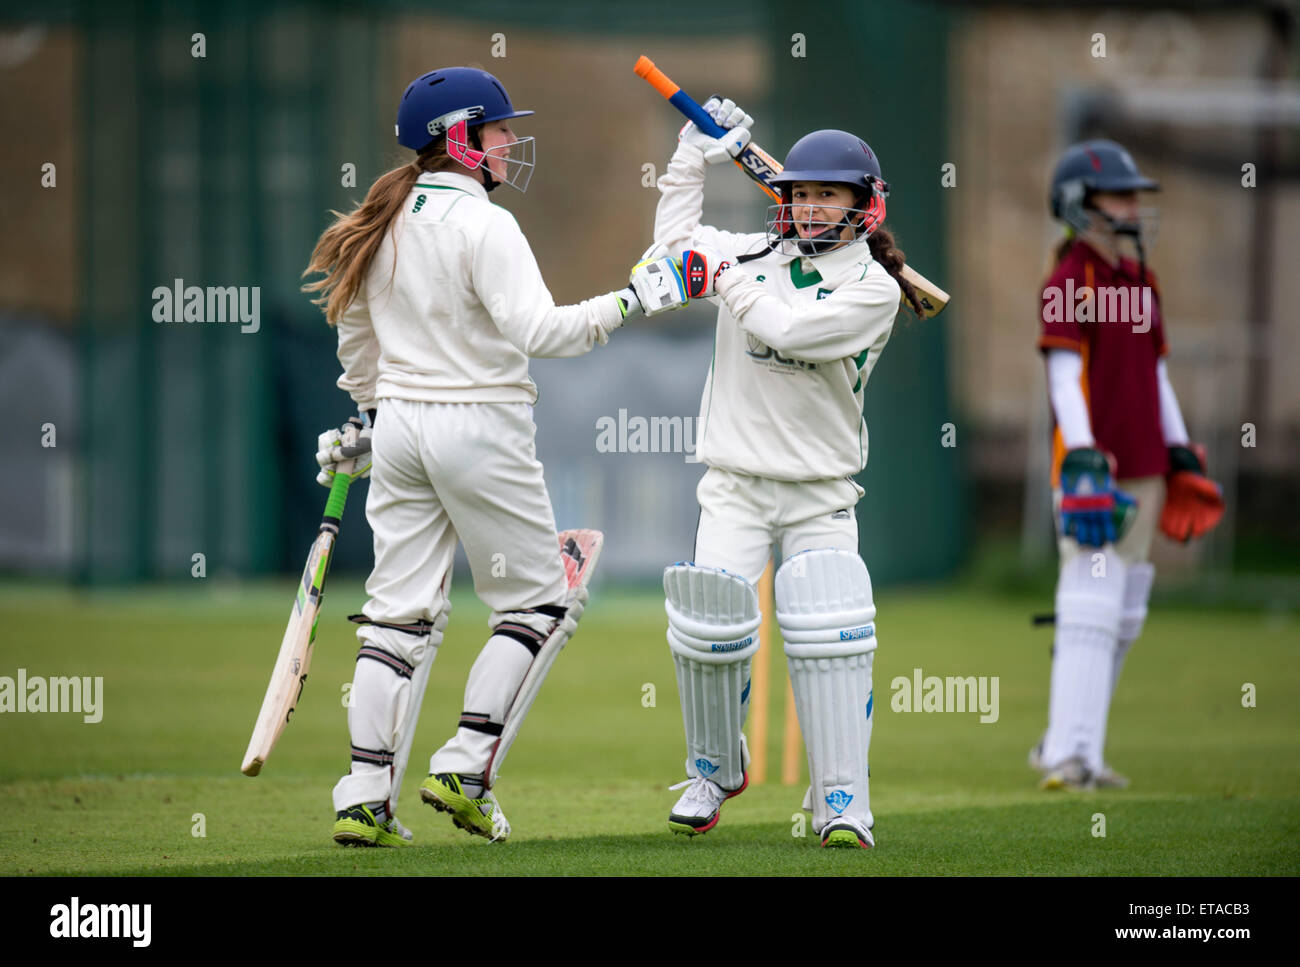 A batsman celebrates her 50 junior during a girls cricket match in Wiltshire UK Stock Photo